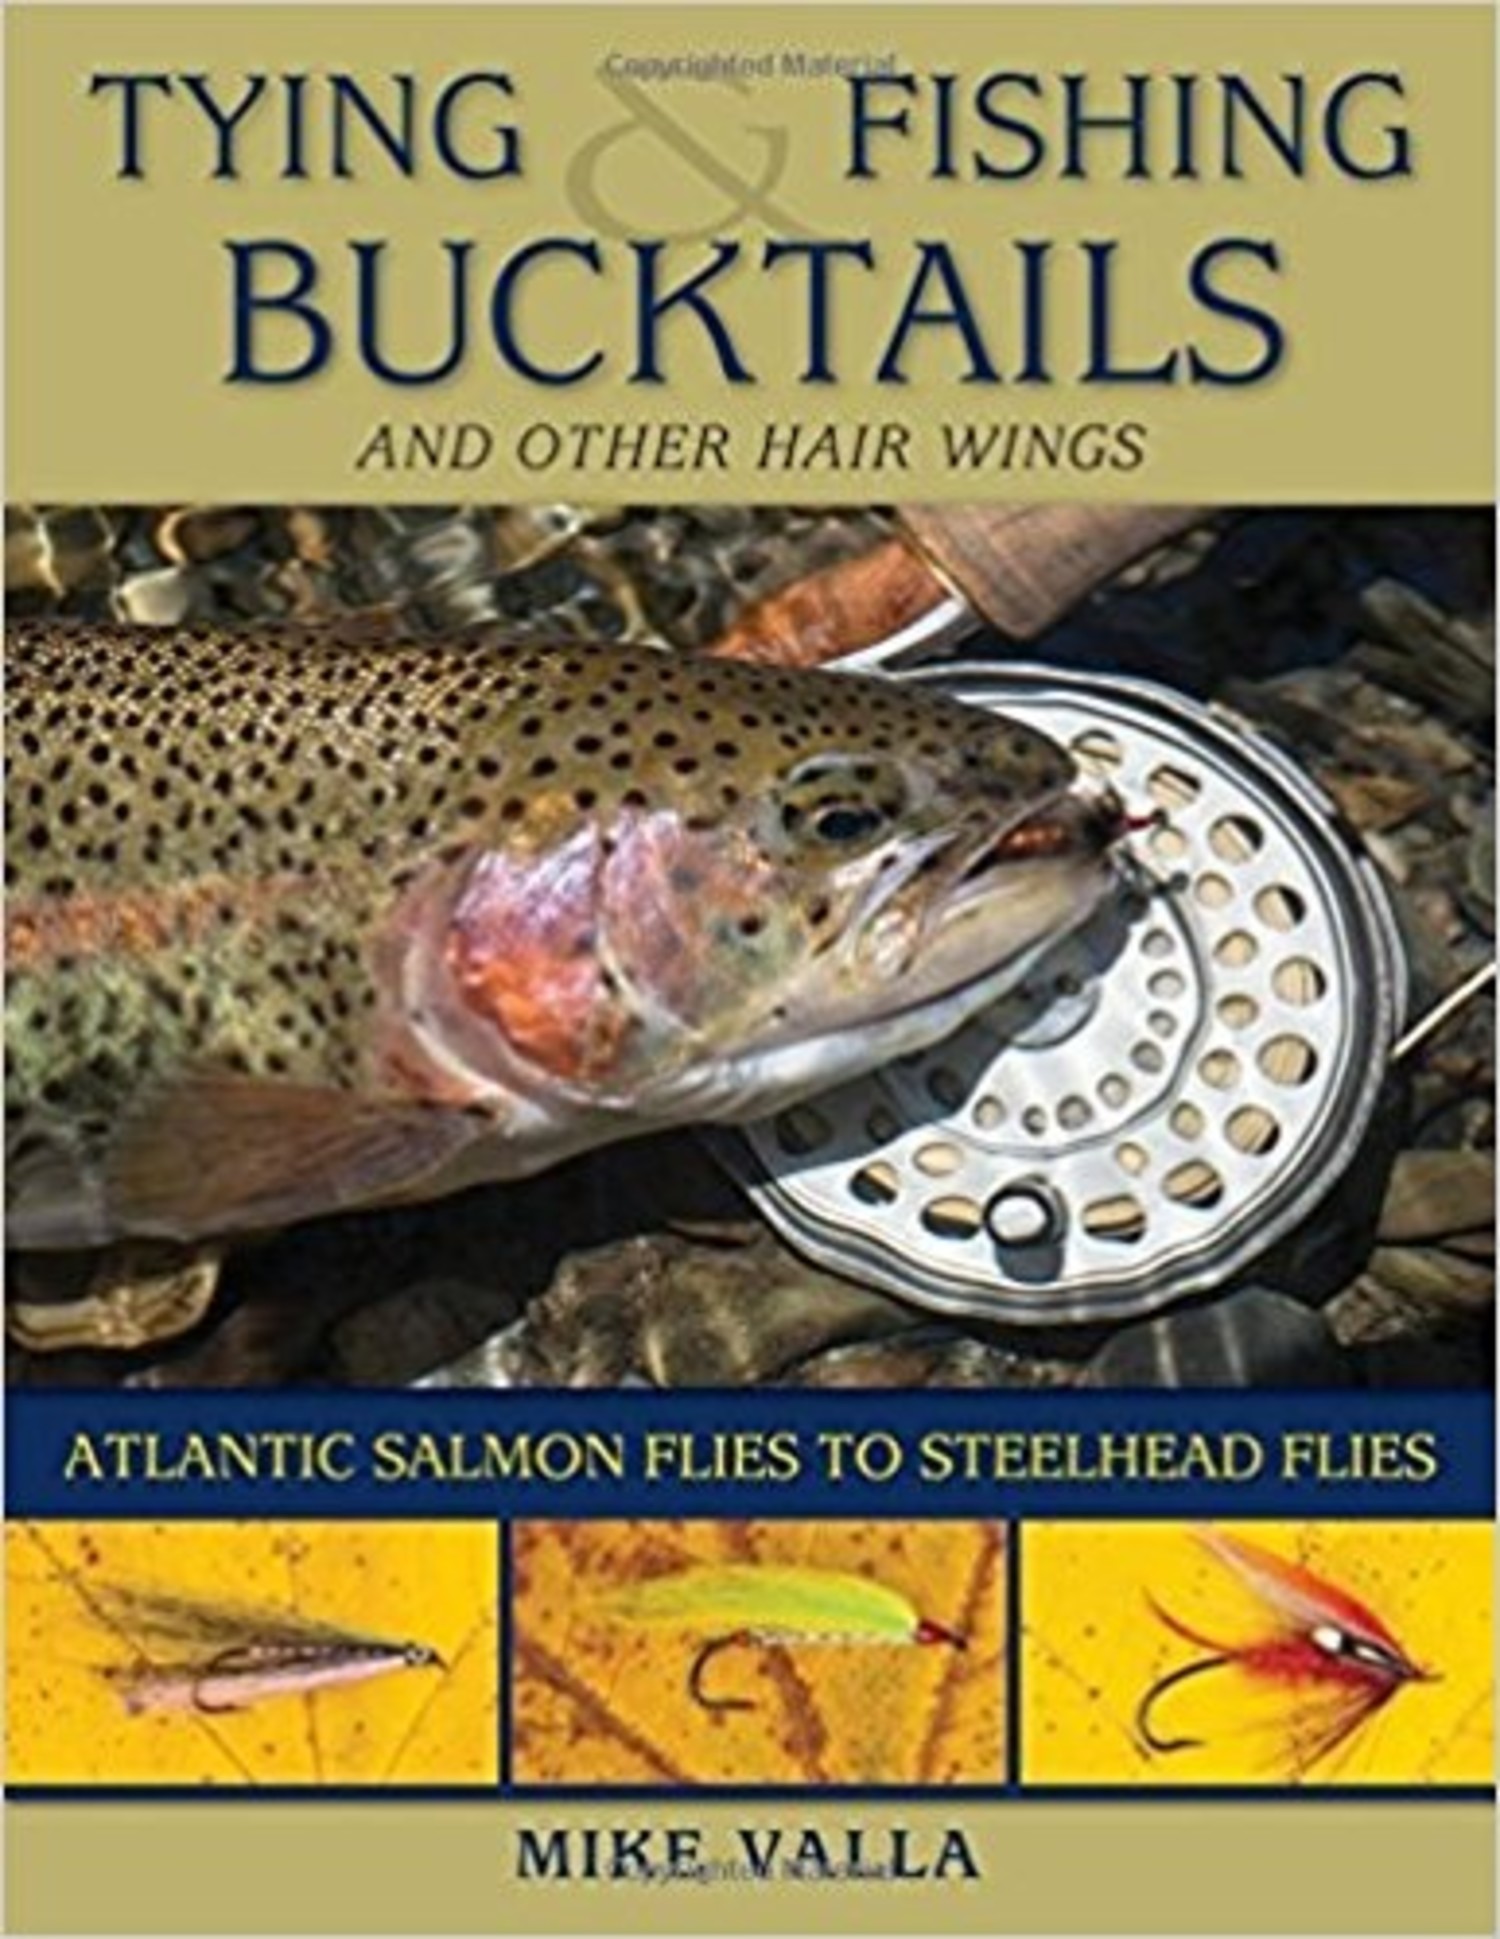 https://cdn.shoplightspeed.com/shops/618341/files/10329440/1500x4000x3/anglers-books-tying-and-fishing-bucktails-and-othe.jpg